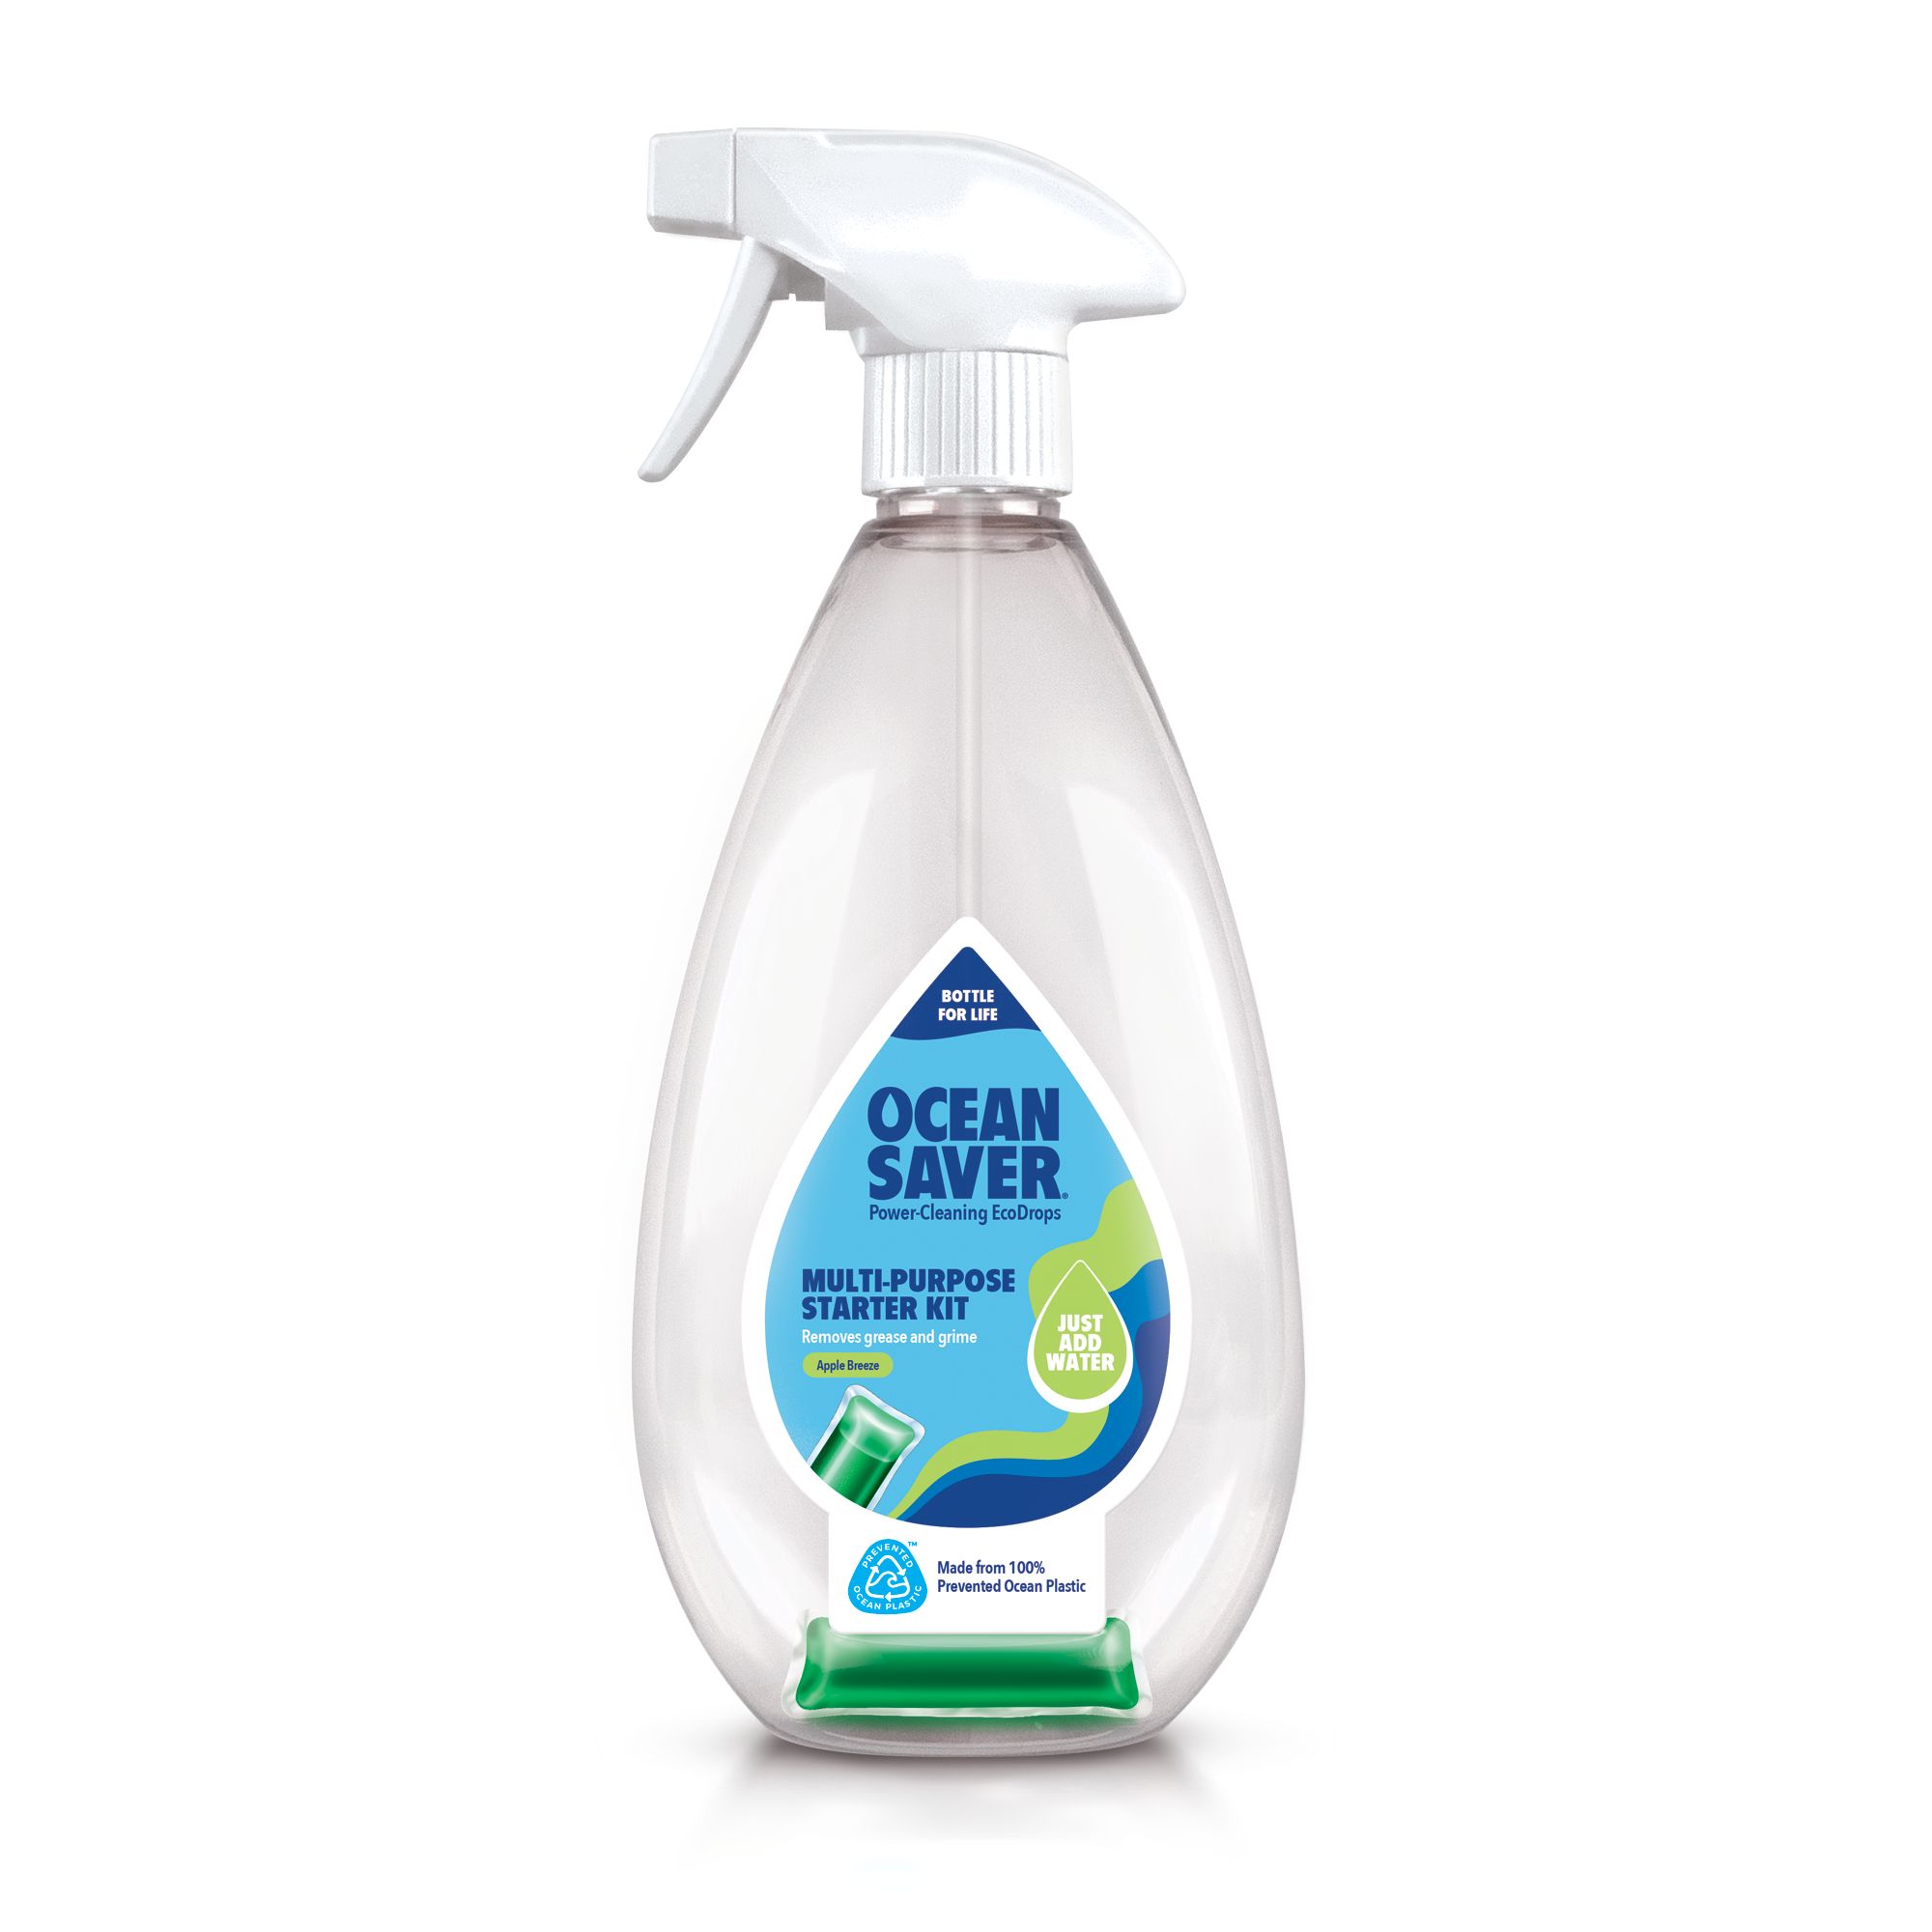 Oceansaver Ecodrops Concentrated Apple Breeze Multi-Surface Cleaning Spray, 10G